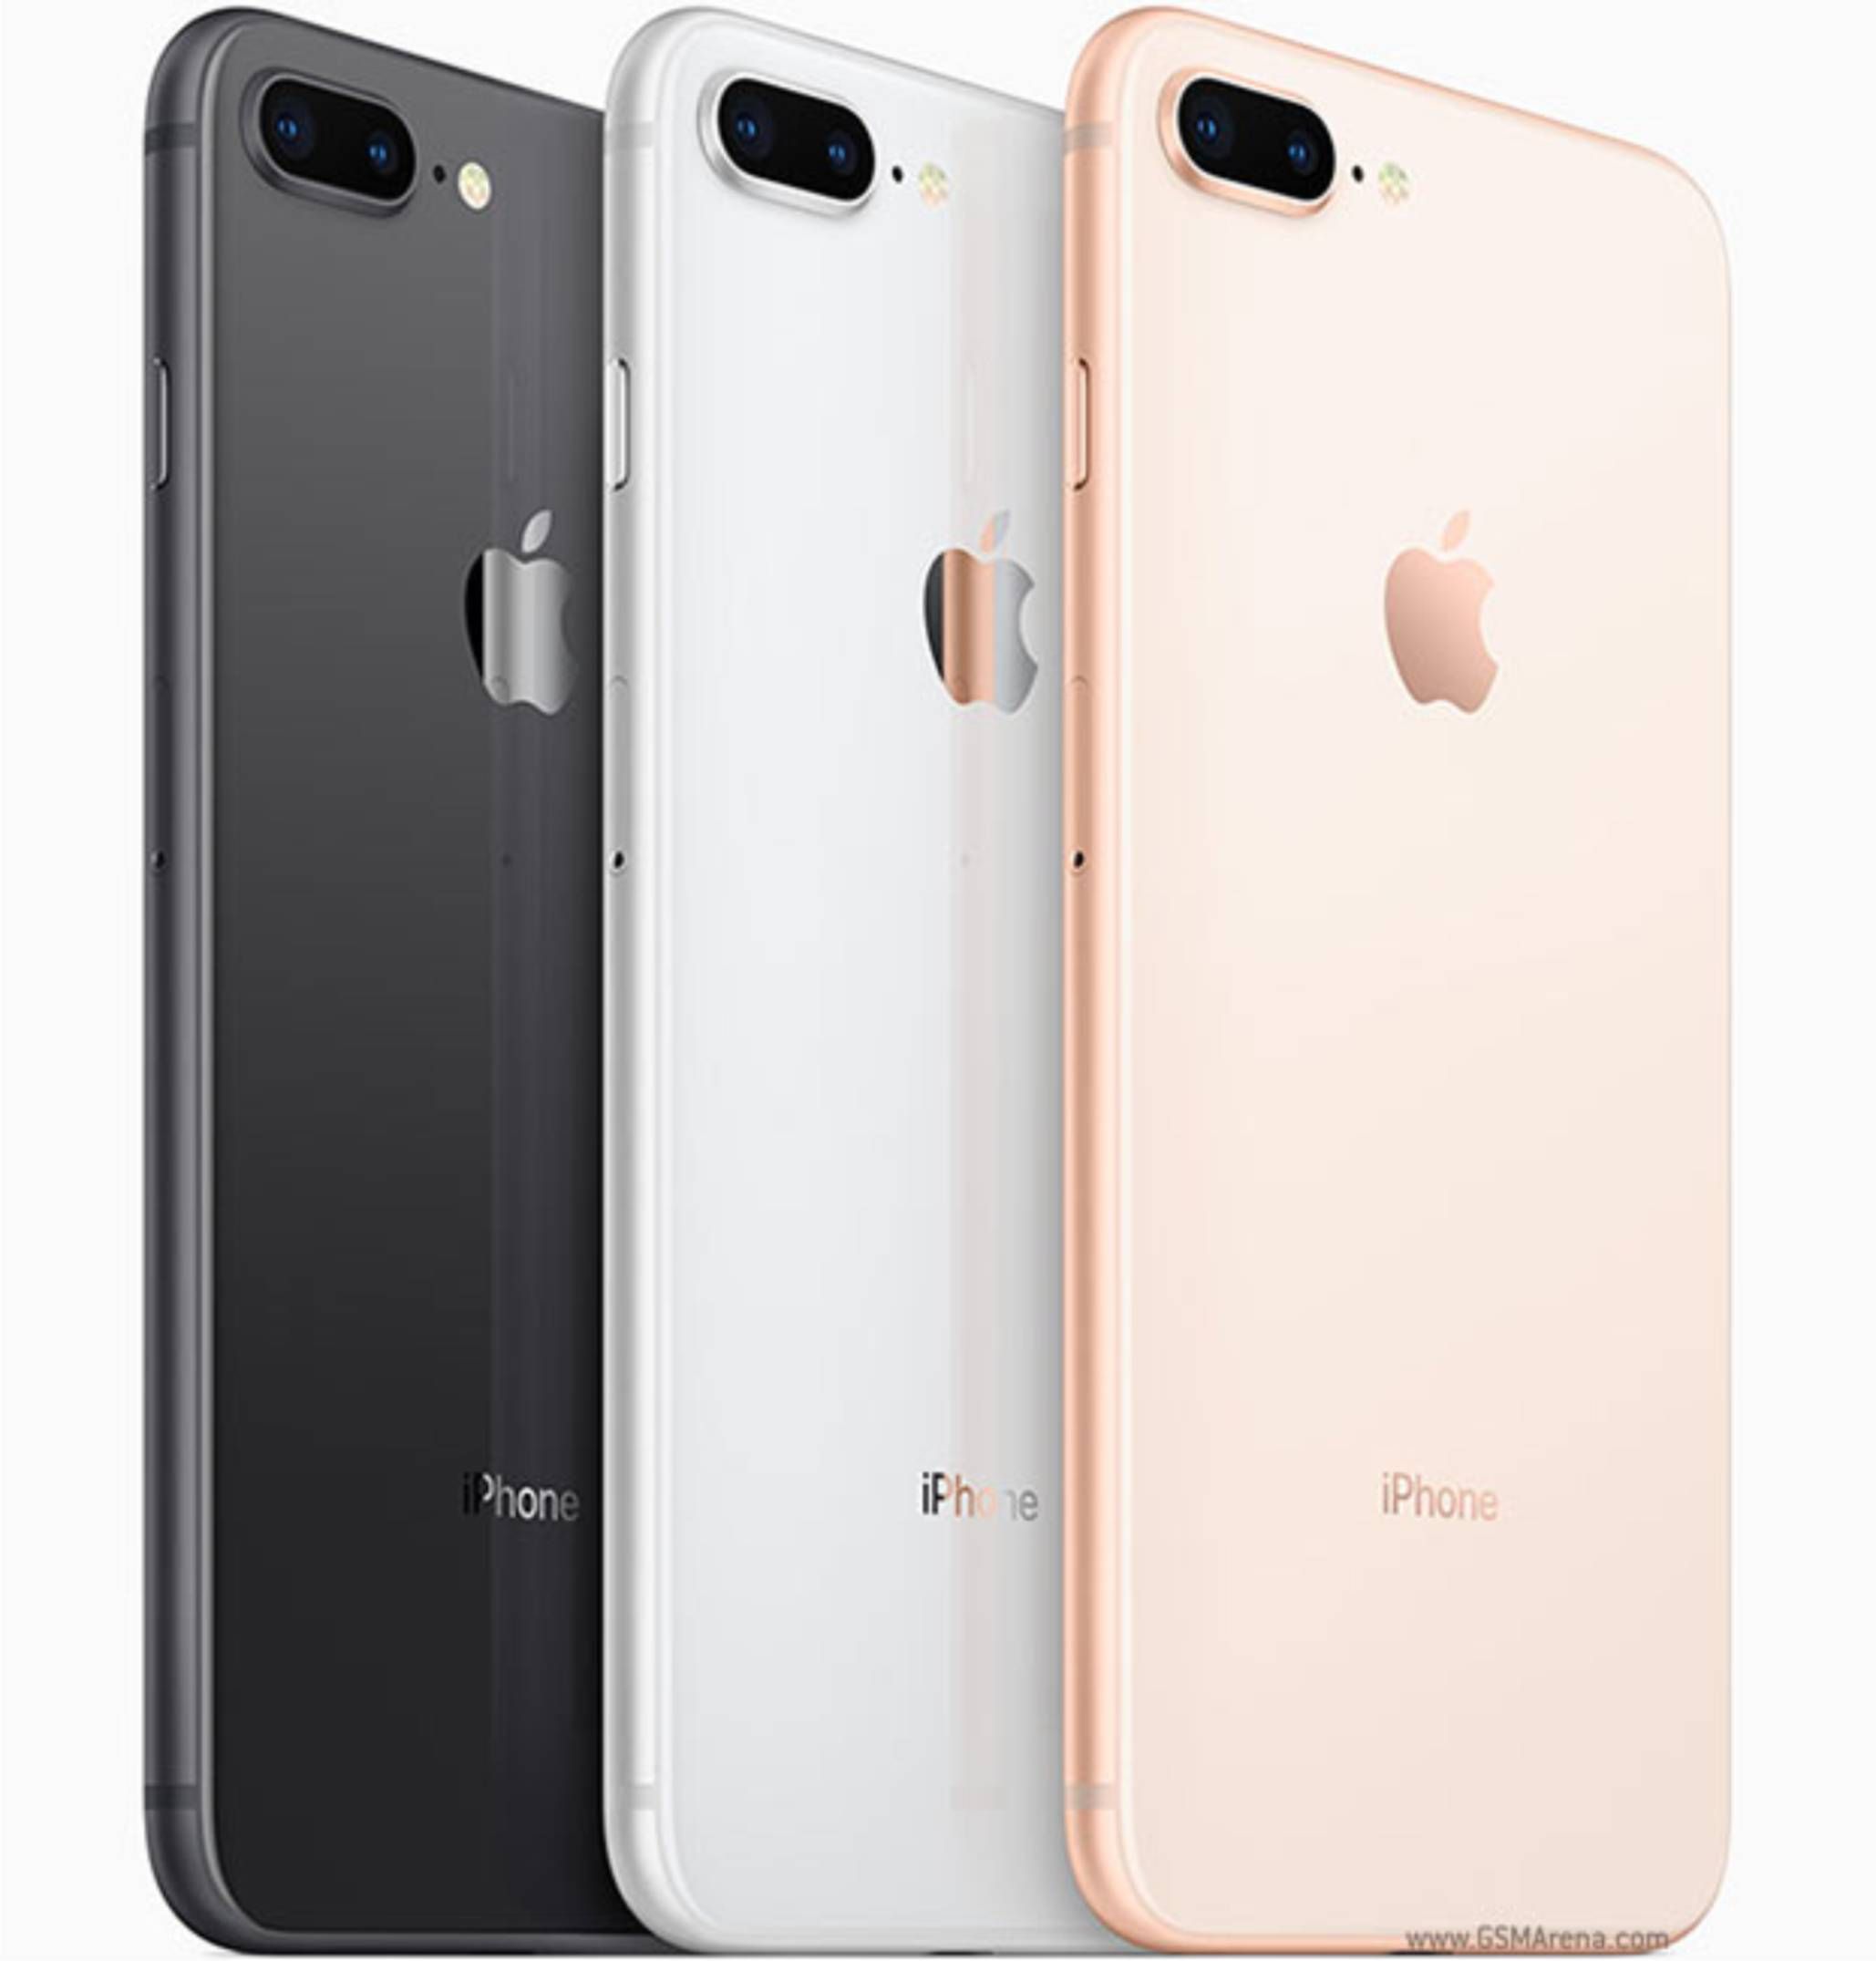 What is Apple iPhone 8 Plus Screen Replacement Cost in Kenya?